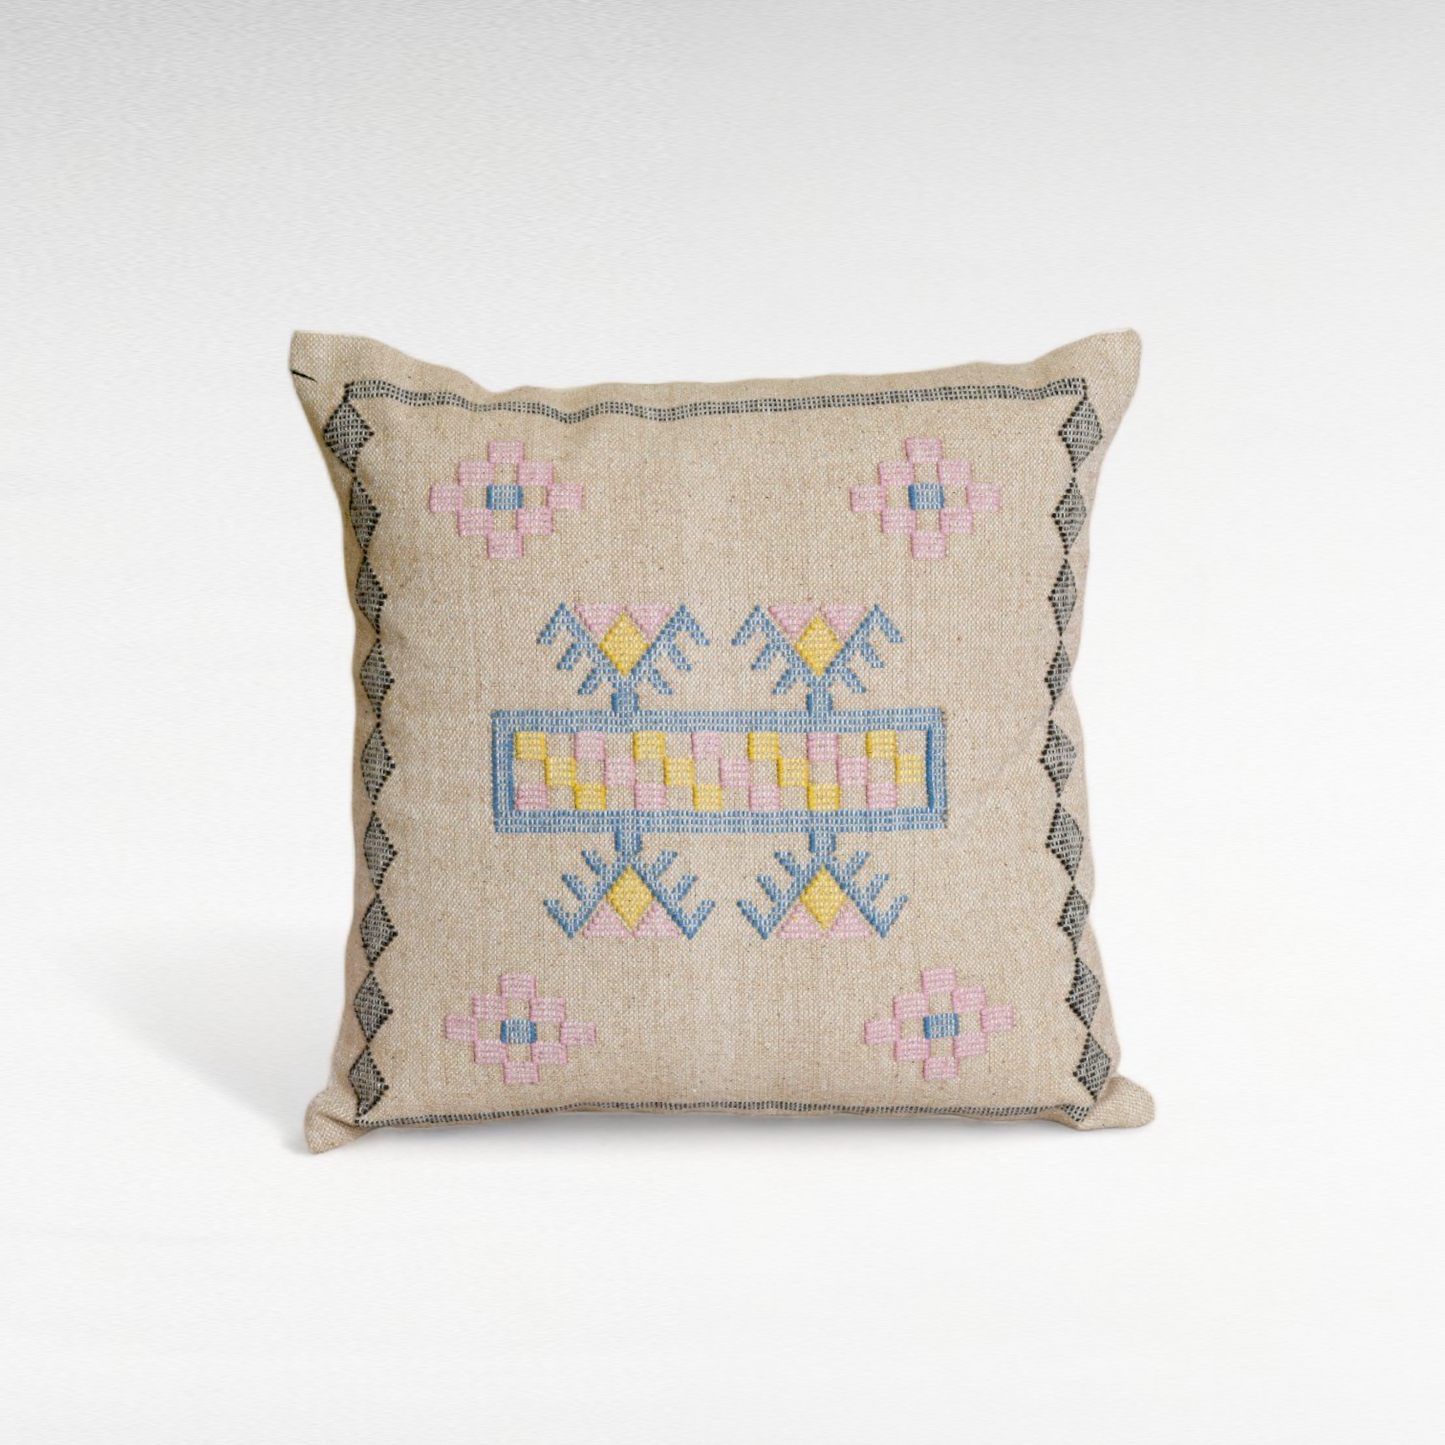 Serenity Cushion Cover